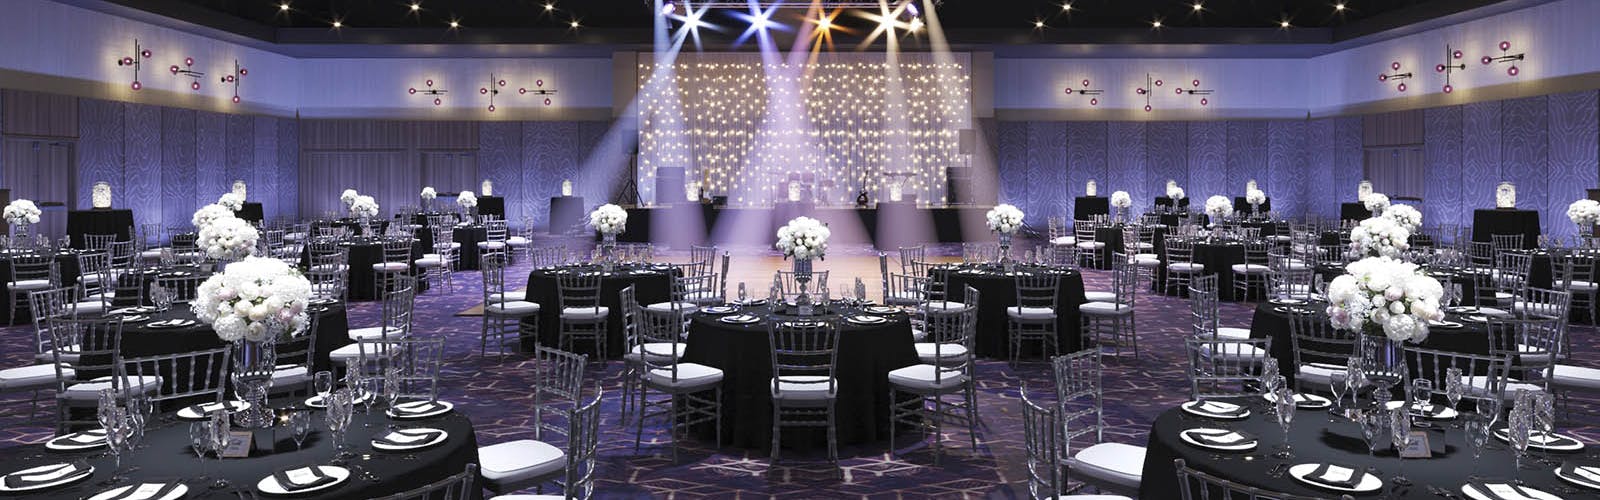 Event Spaces for Social Events